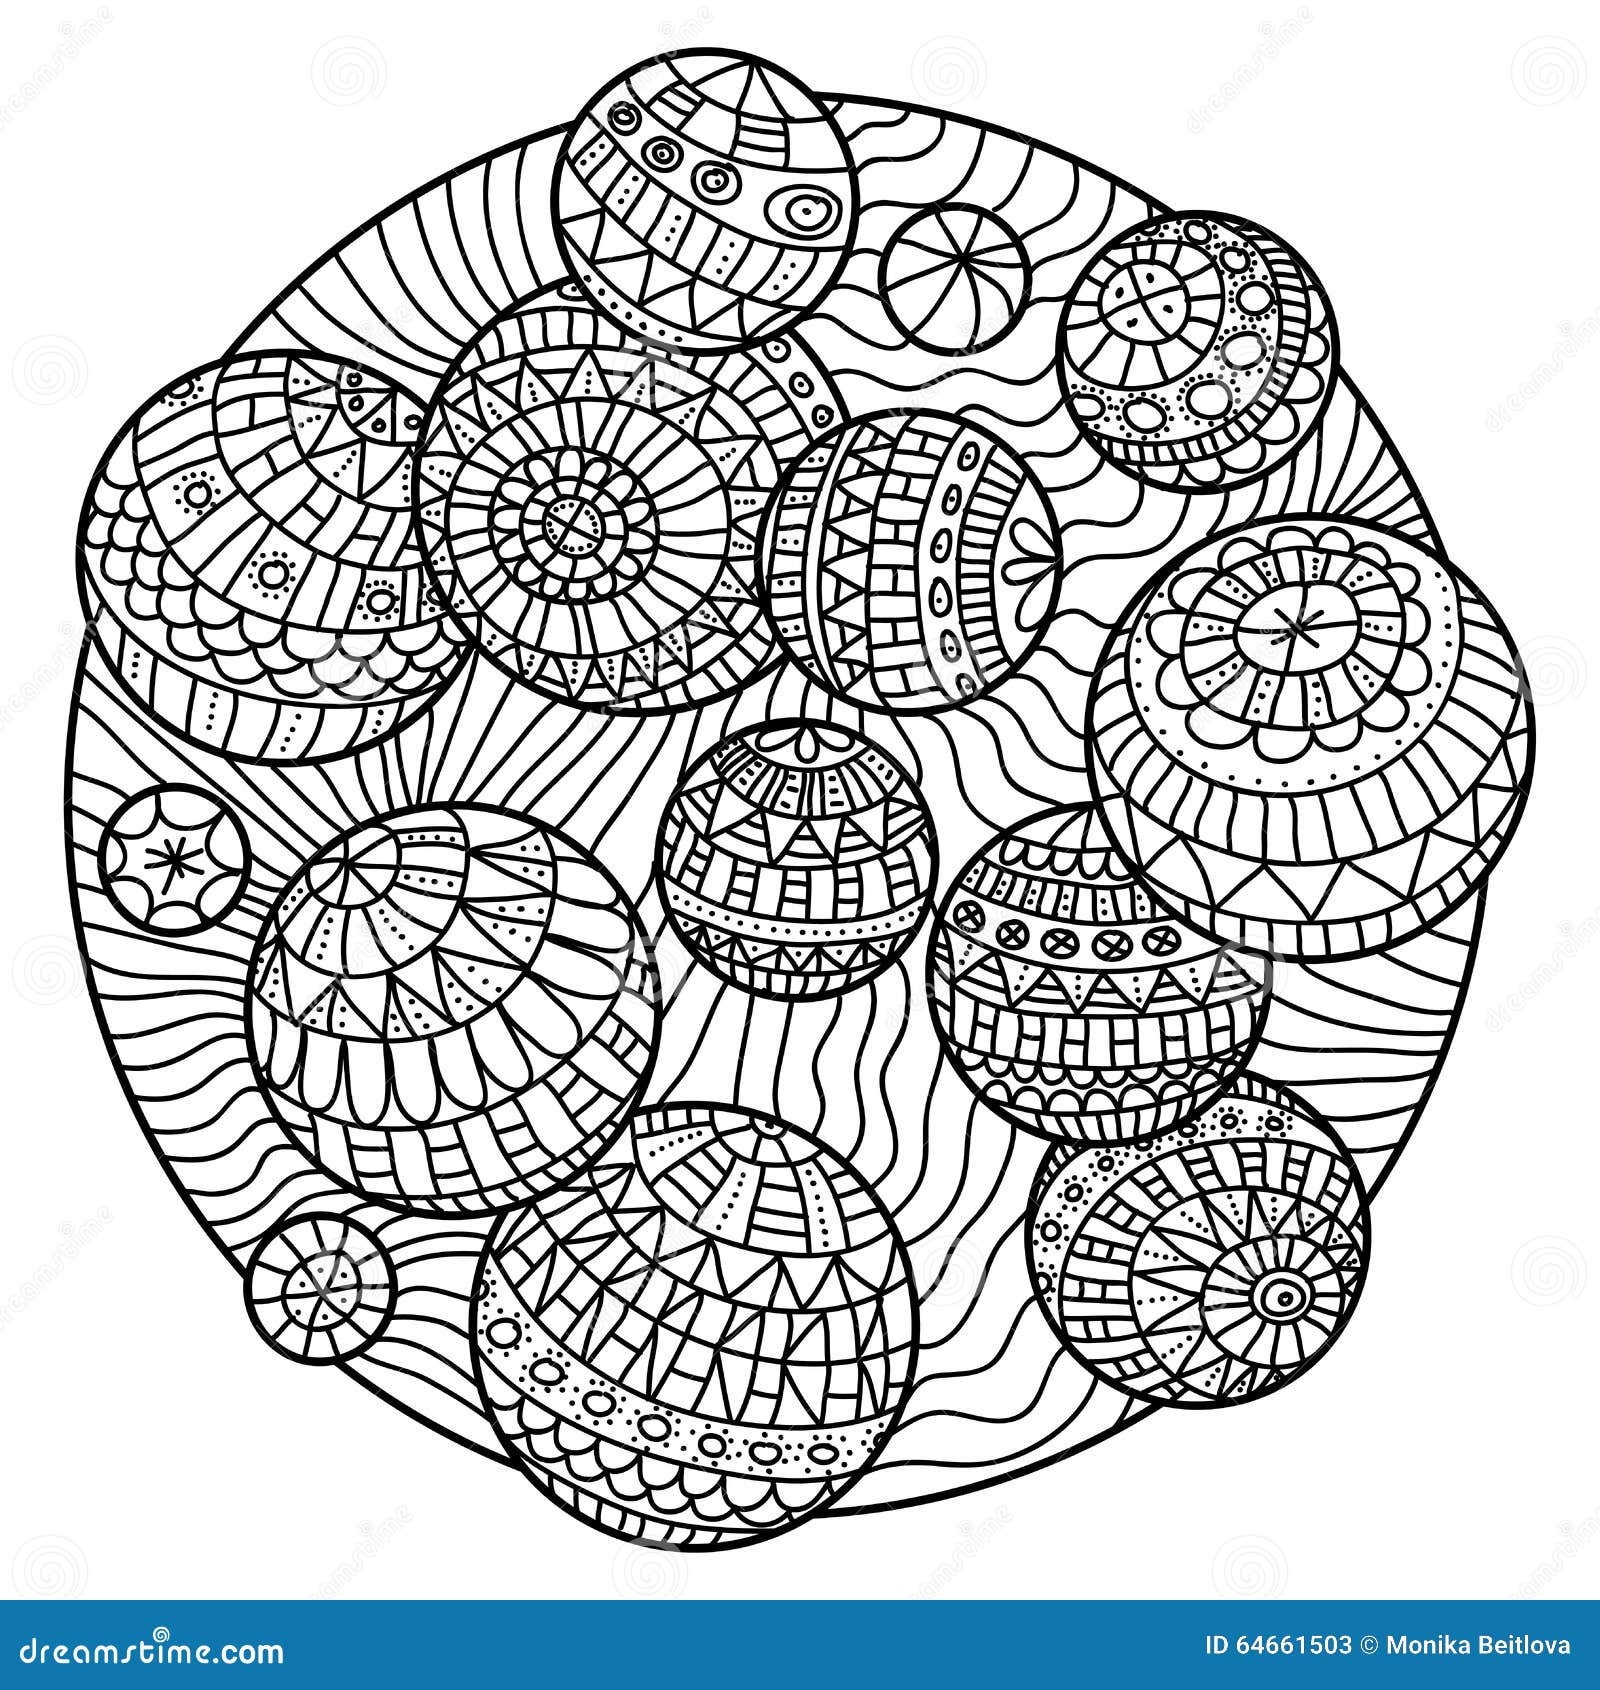 Zentangle coloring book stock vector. Illustration of circle - 64661503